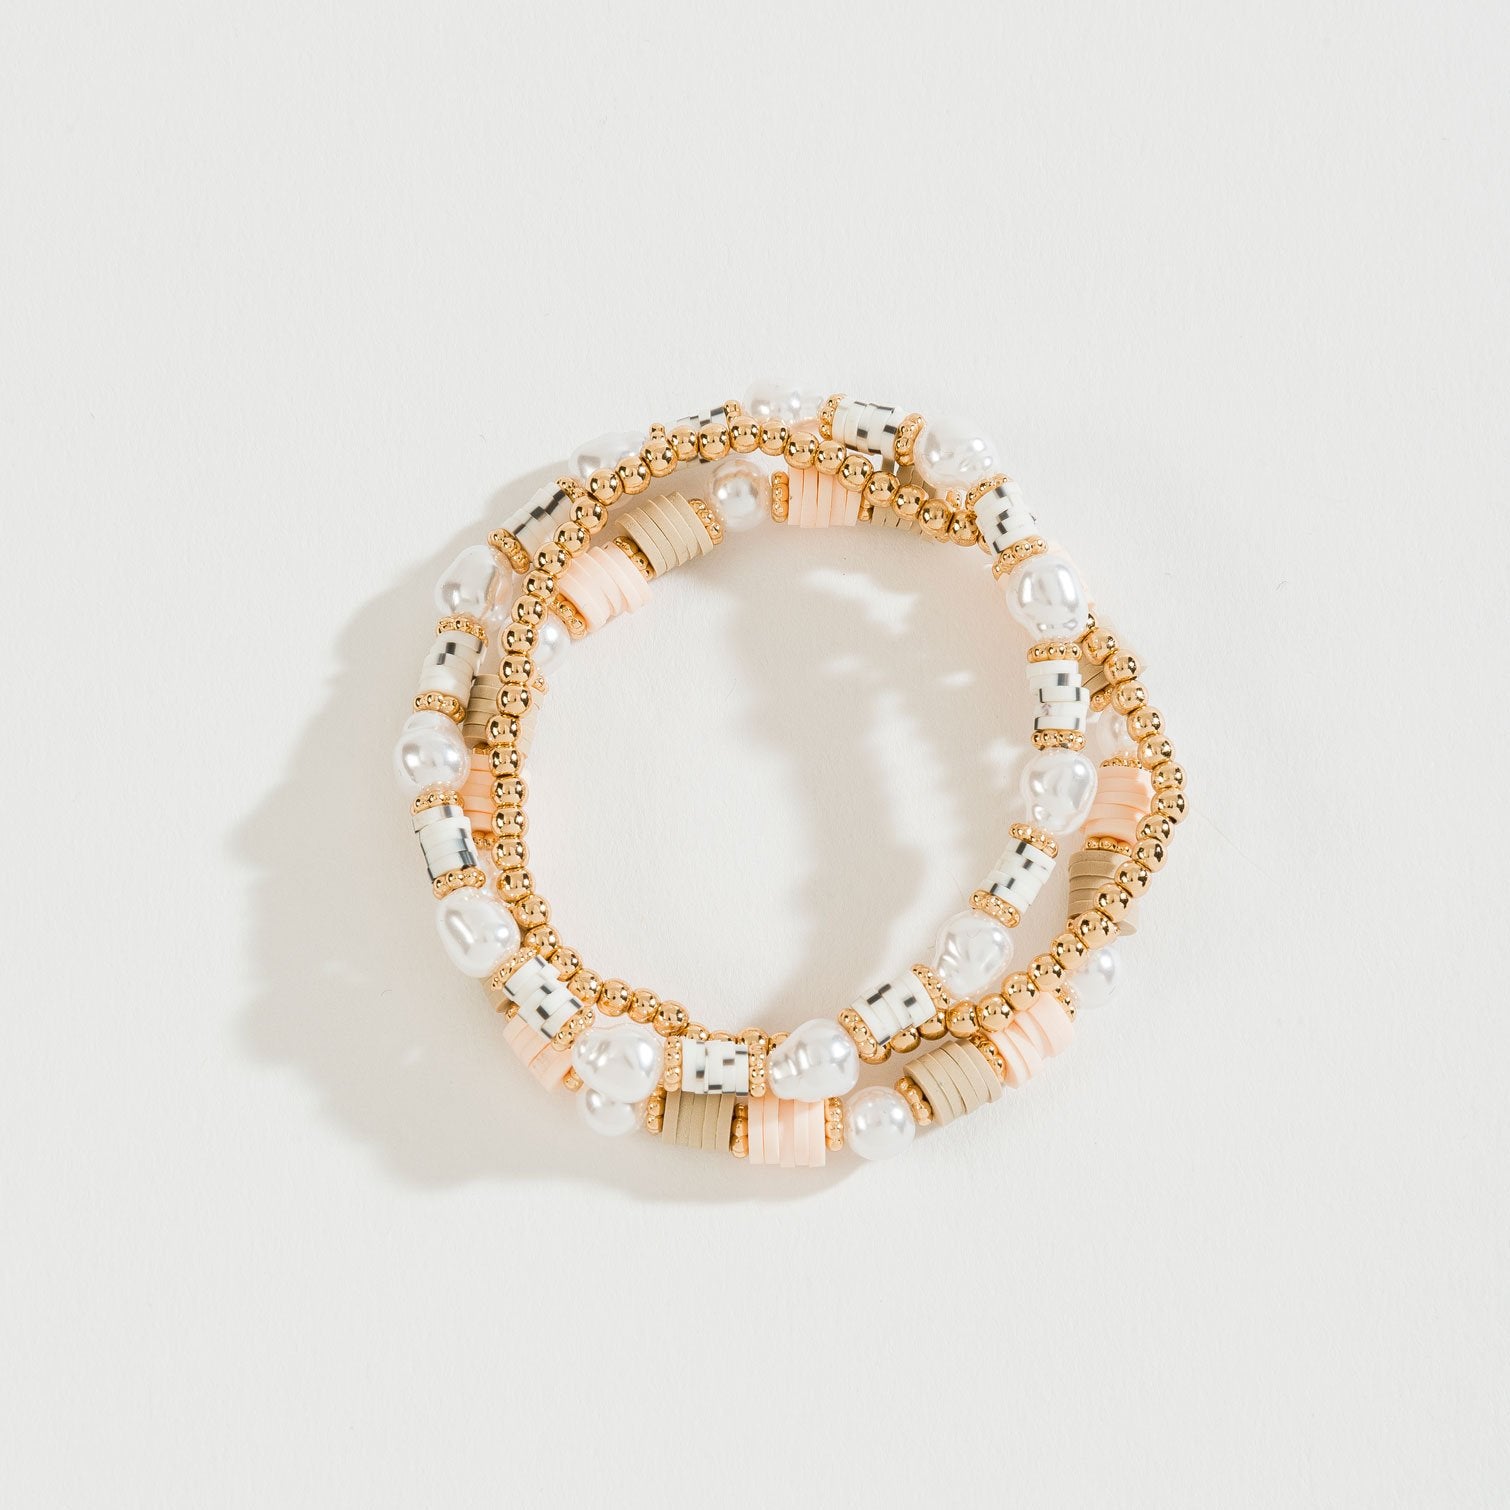 DISC BEAD AND  PEARL STRETCH BRACELET